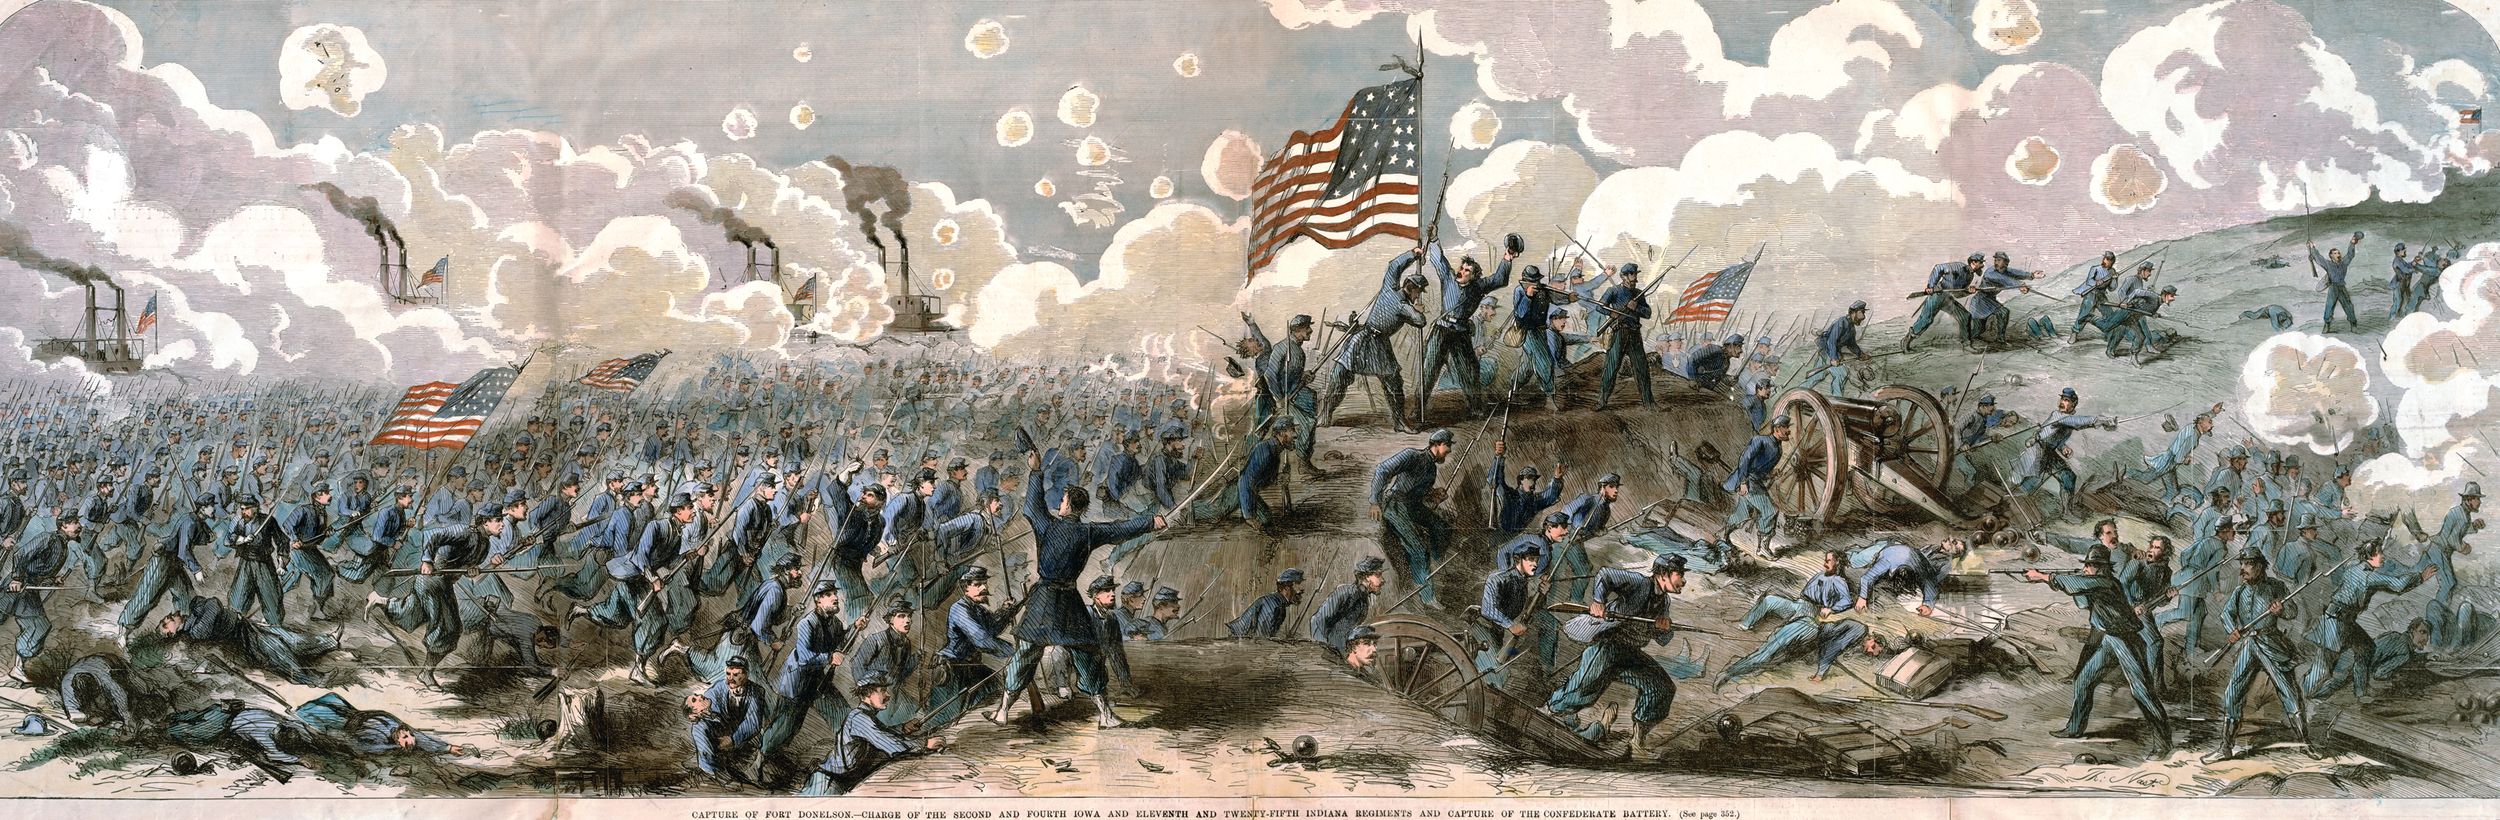 Union Brig. Gen. Charles F. Smith’s troops storm Fort Donelson, overrunning a battery and breaching part of the defenses on the Confederate right flank. Union morale ran high throughout the campaign.